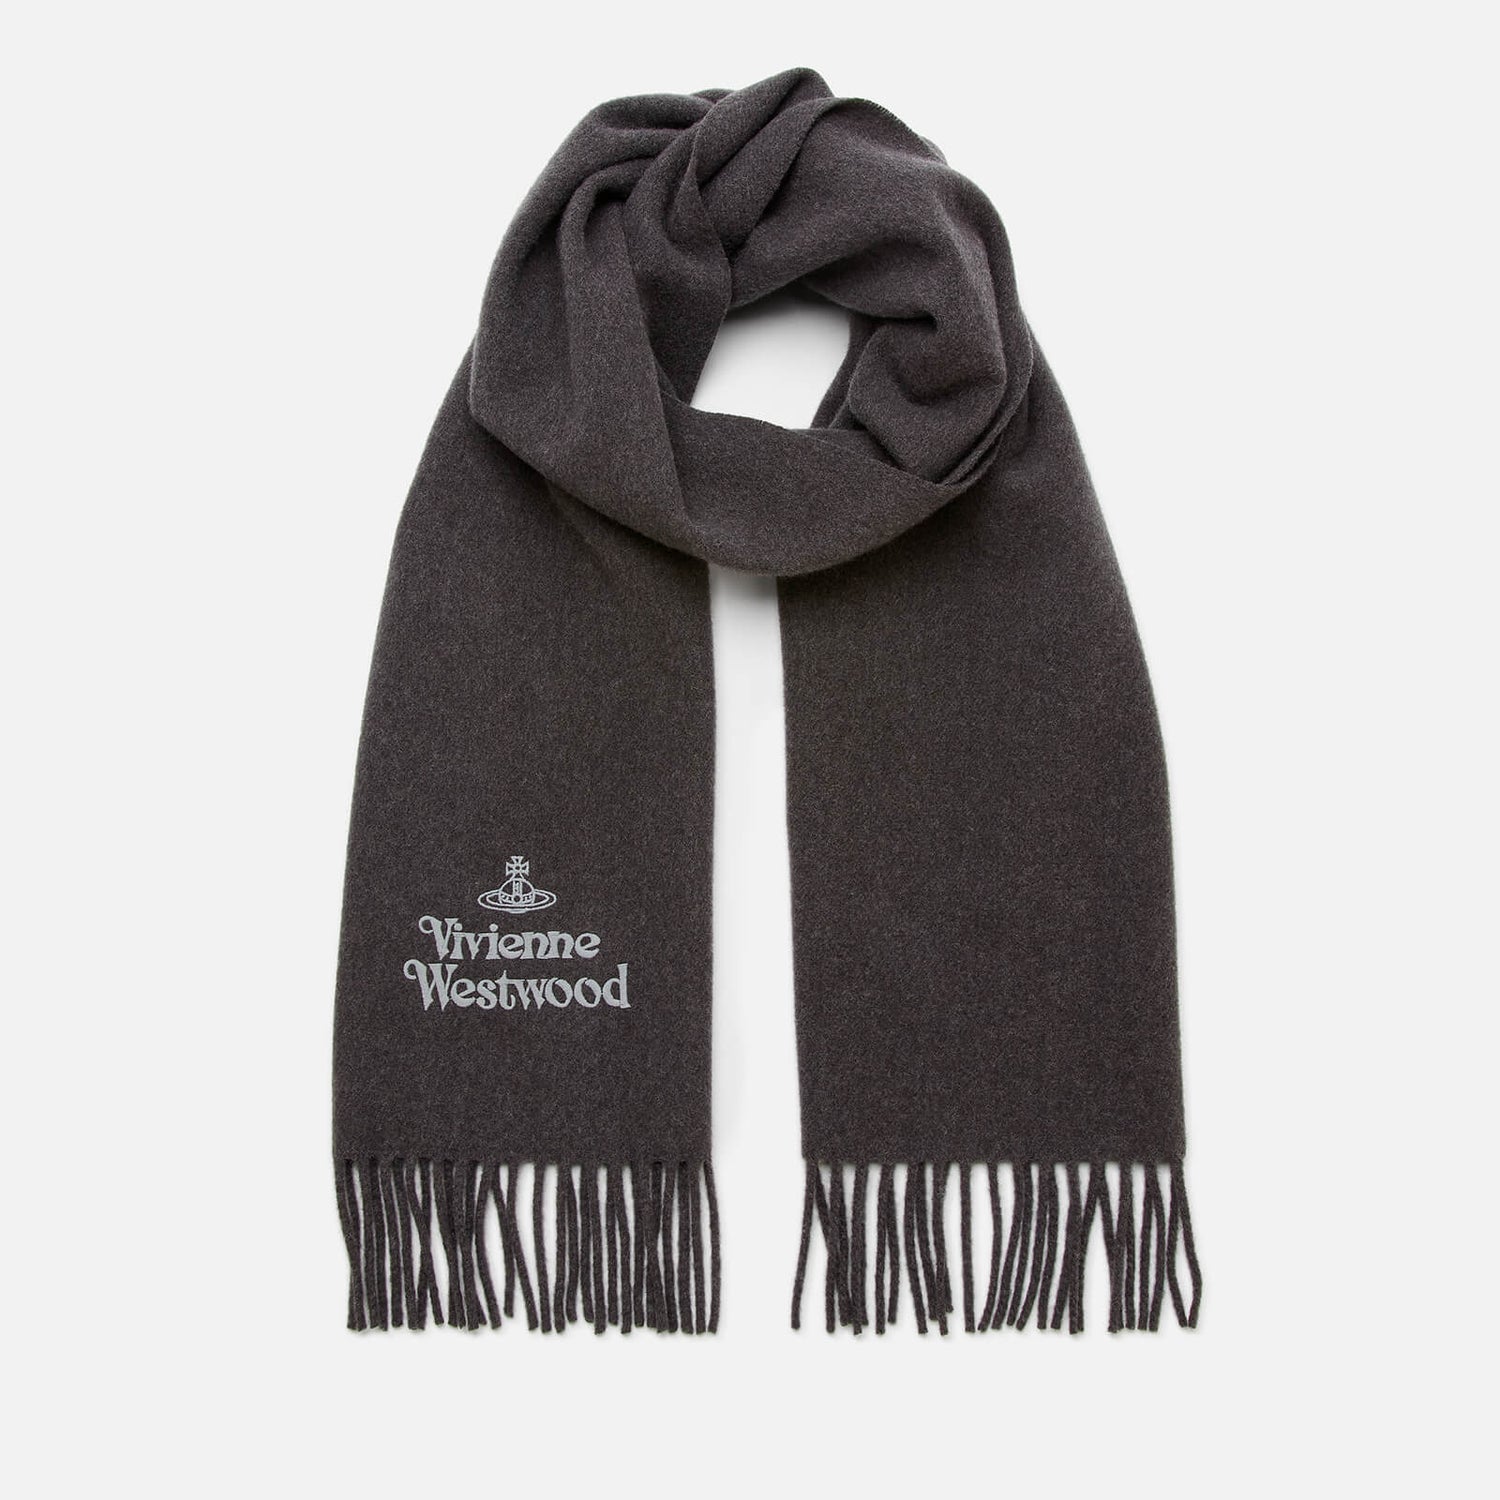 Vivienne Westwood Women's Embroidered Lambswool Scarf - Anthracite Melange